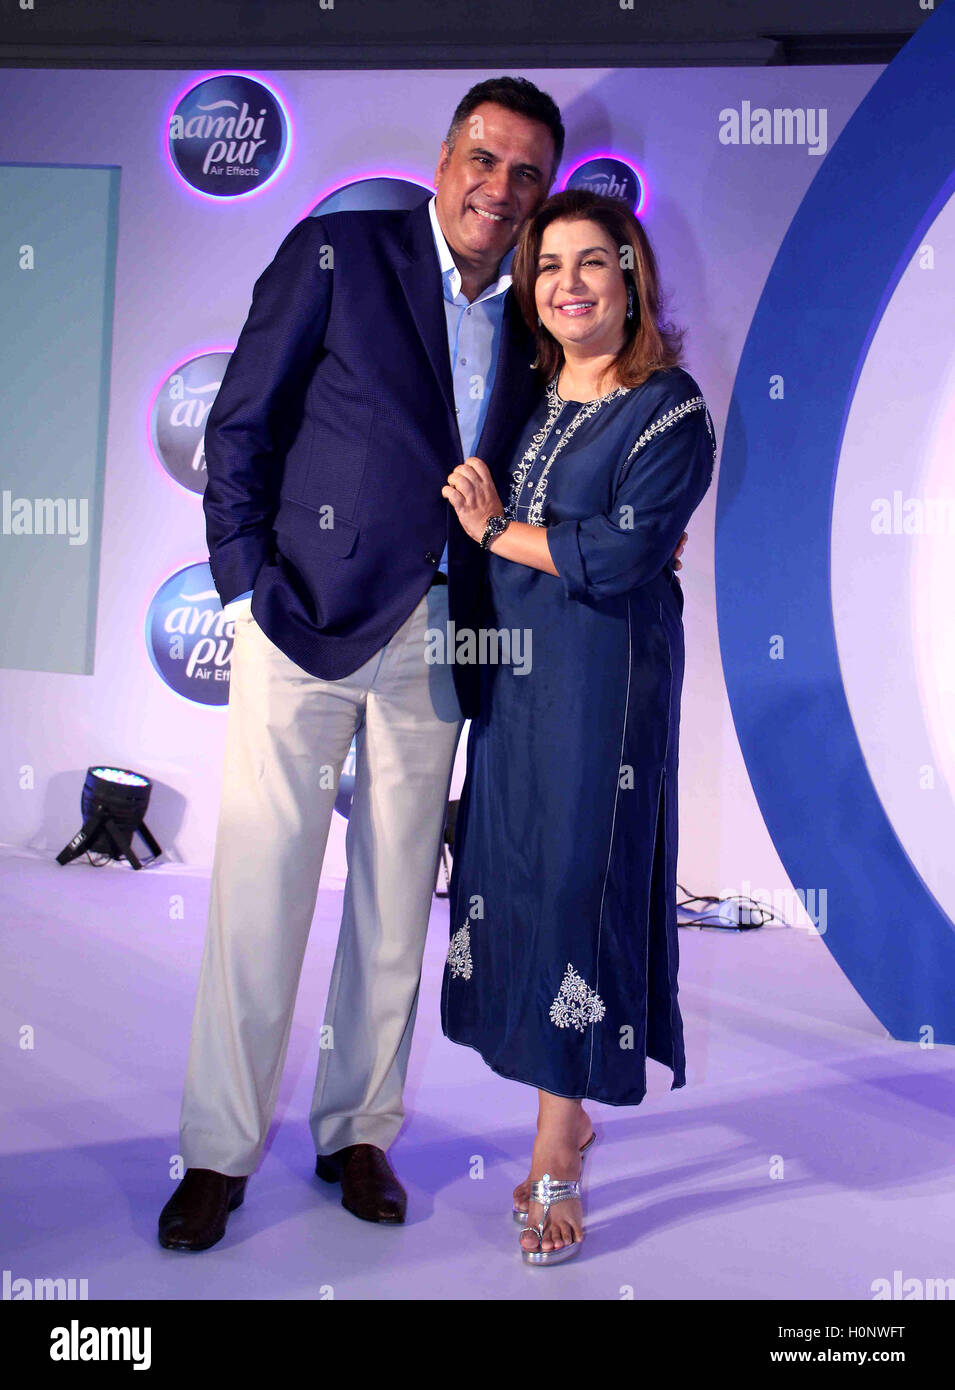 Bollywood actor Boman Irani and filmmaker Farah Khan during a promotional event by Ambi Pur, in Mumbai, India Stock Photo